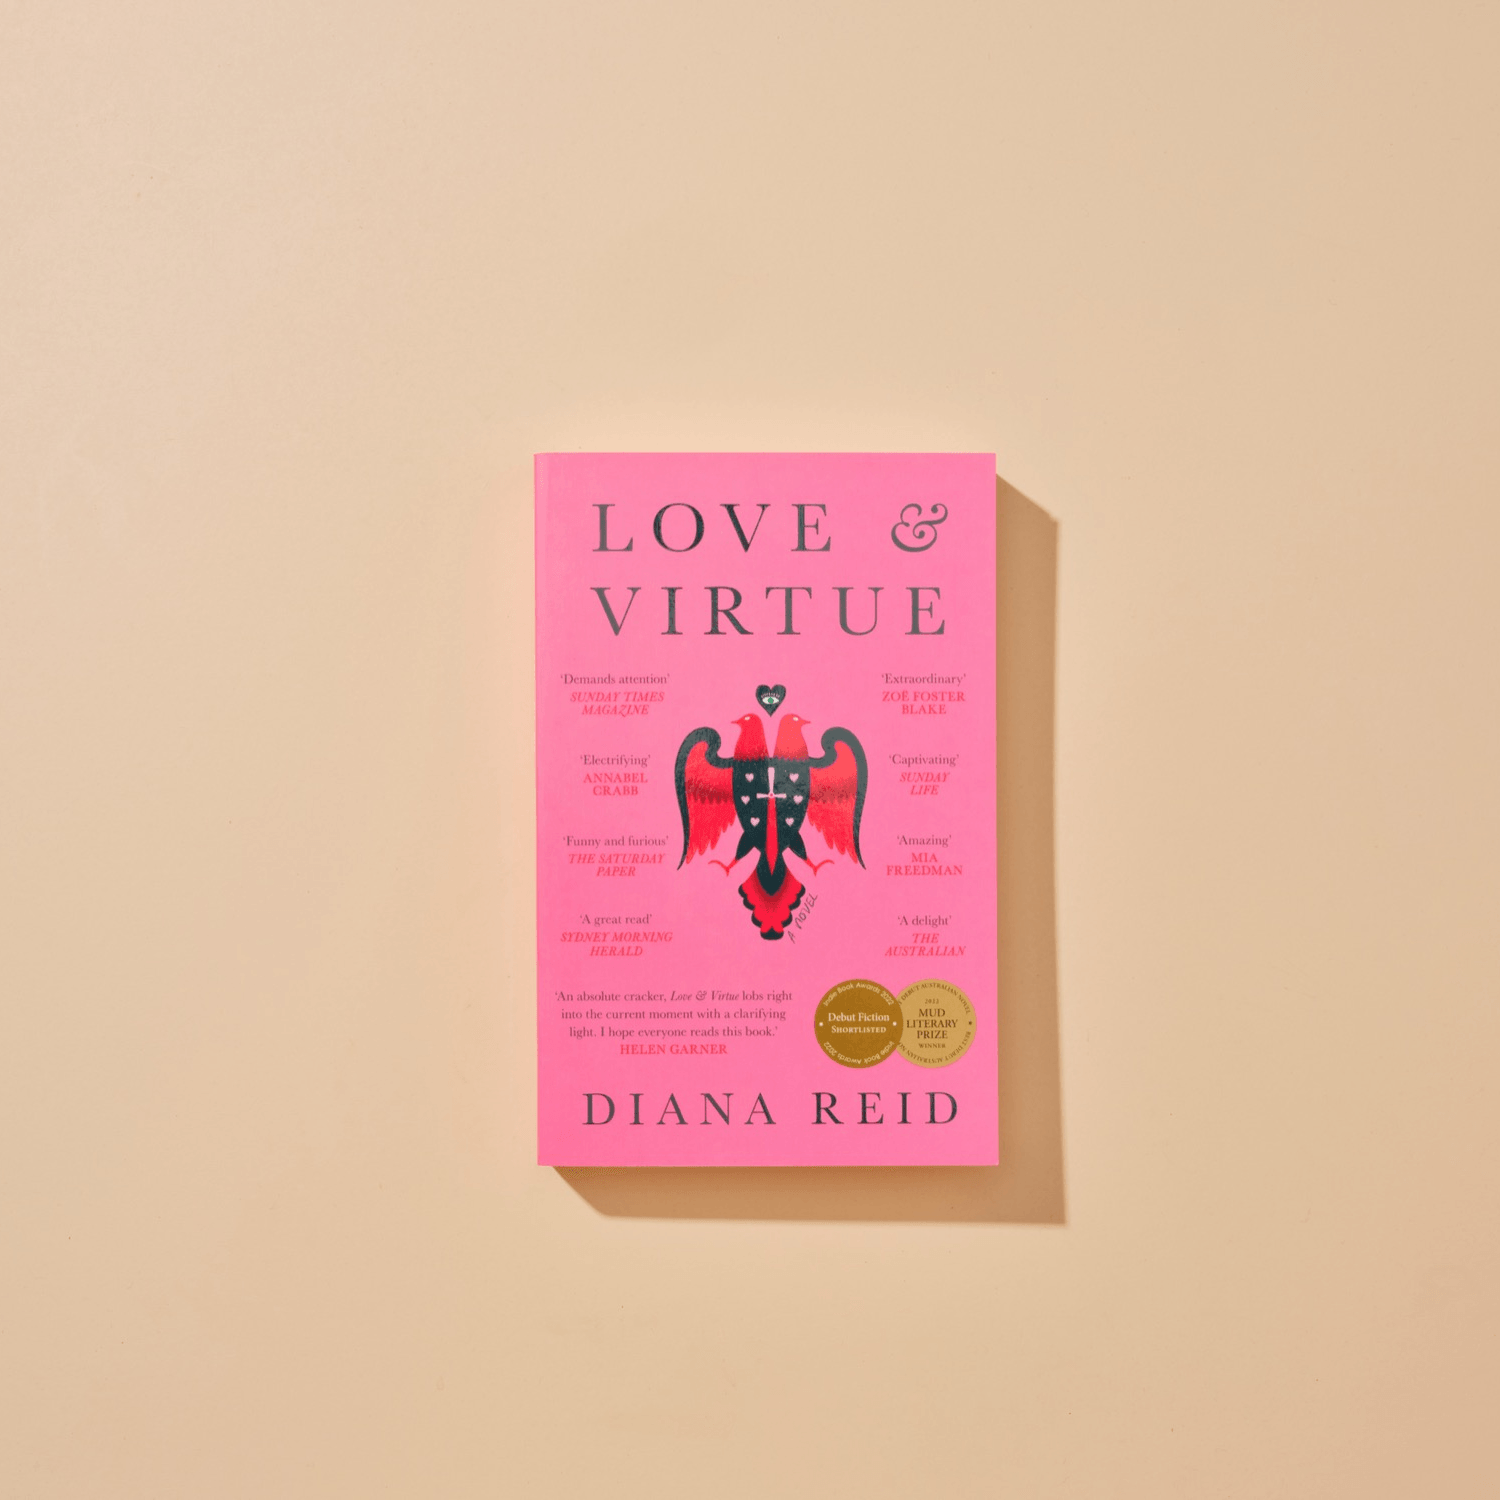 Love and Virtue Book Cover by Diana Reid